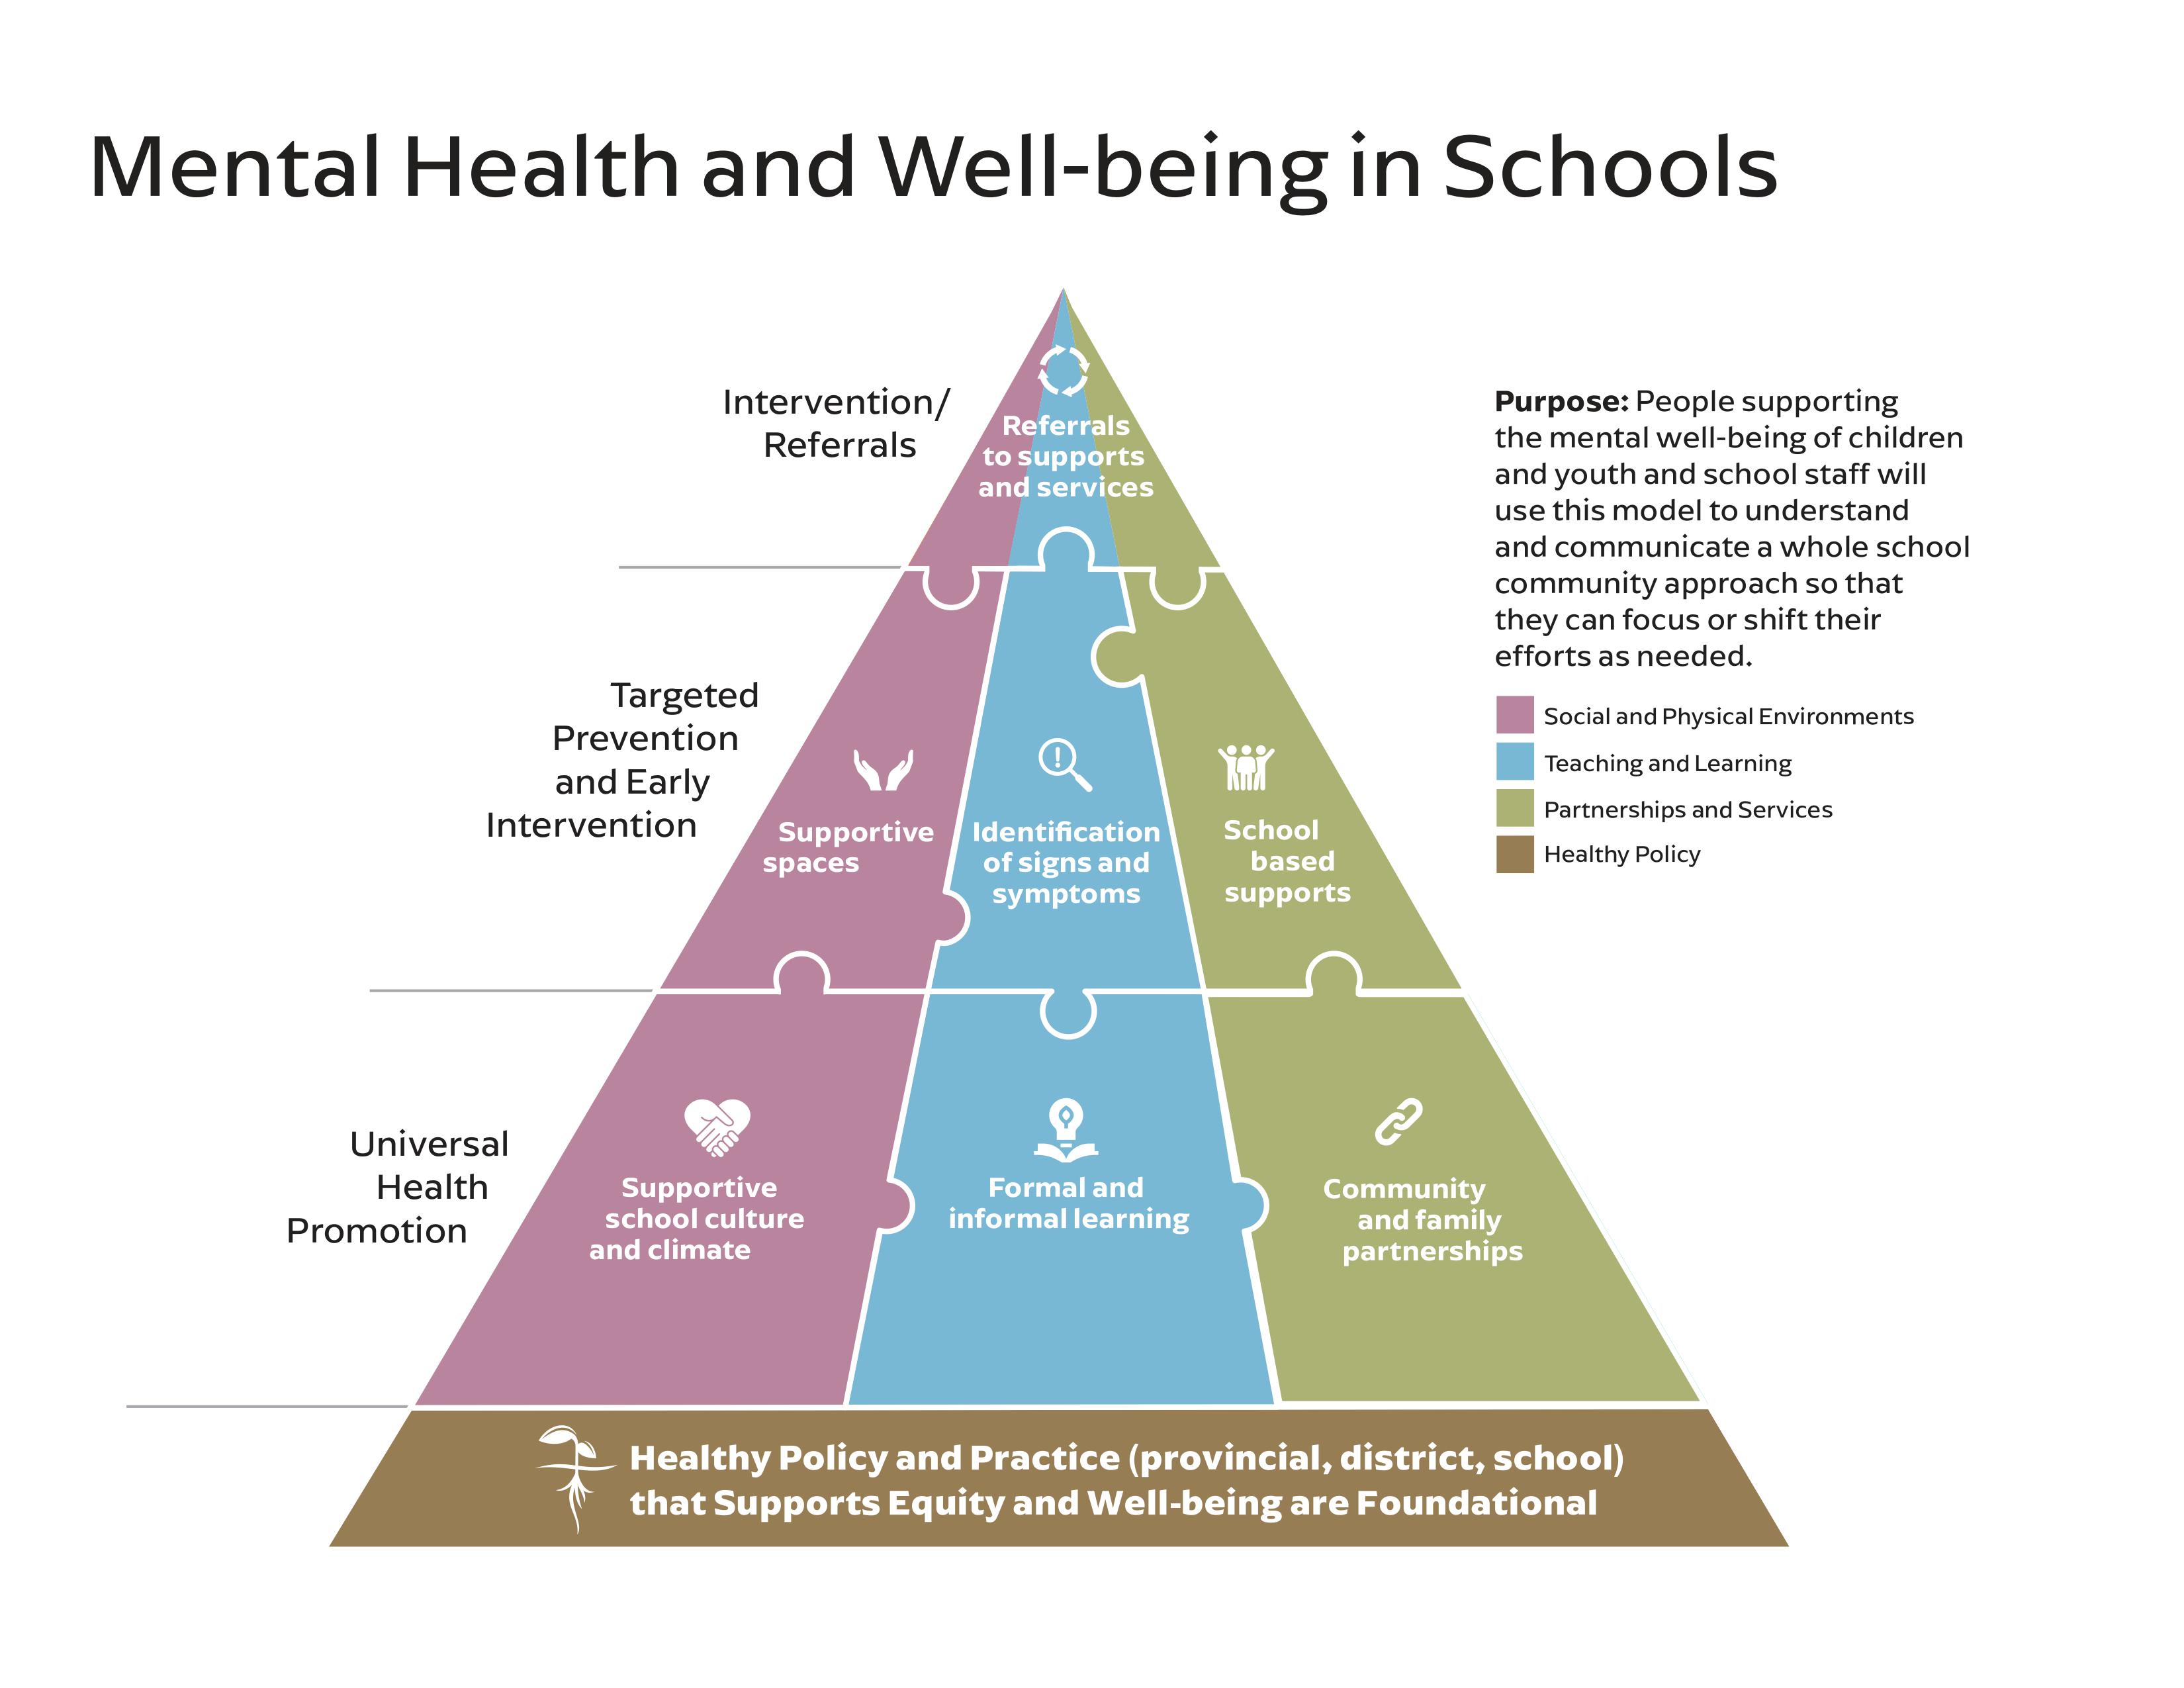 Mental Health and Well-Being in Schools Puzzle Model